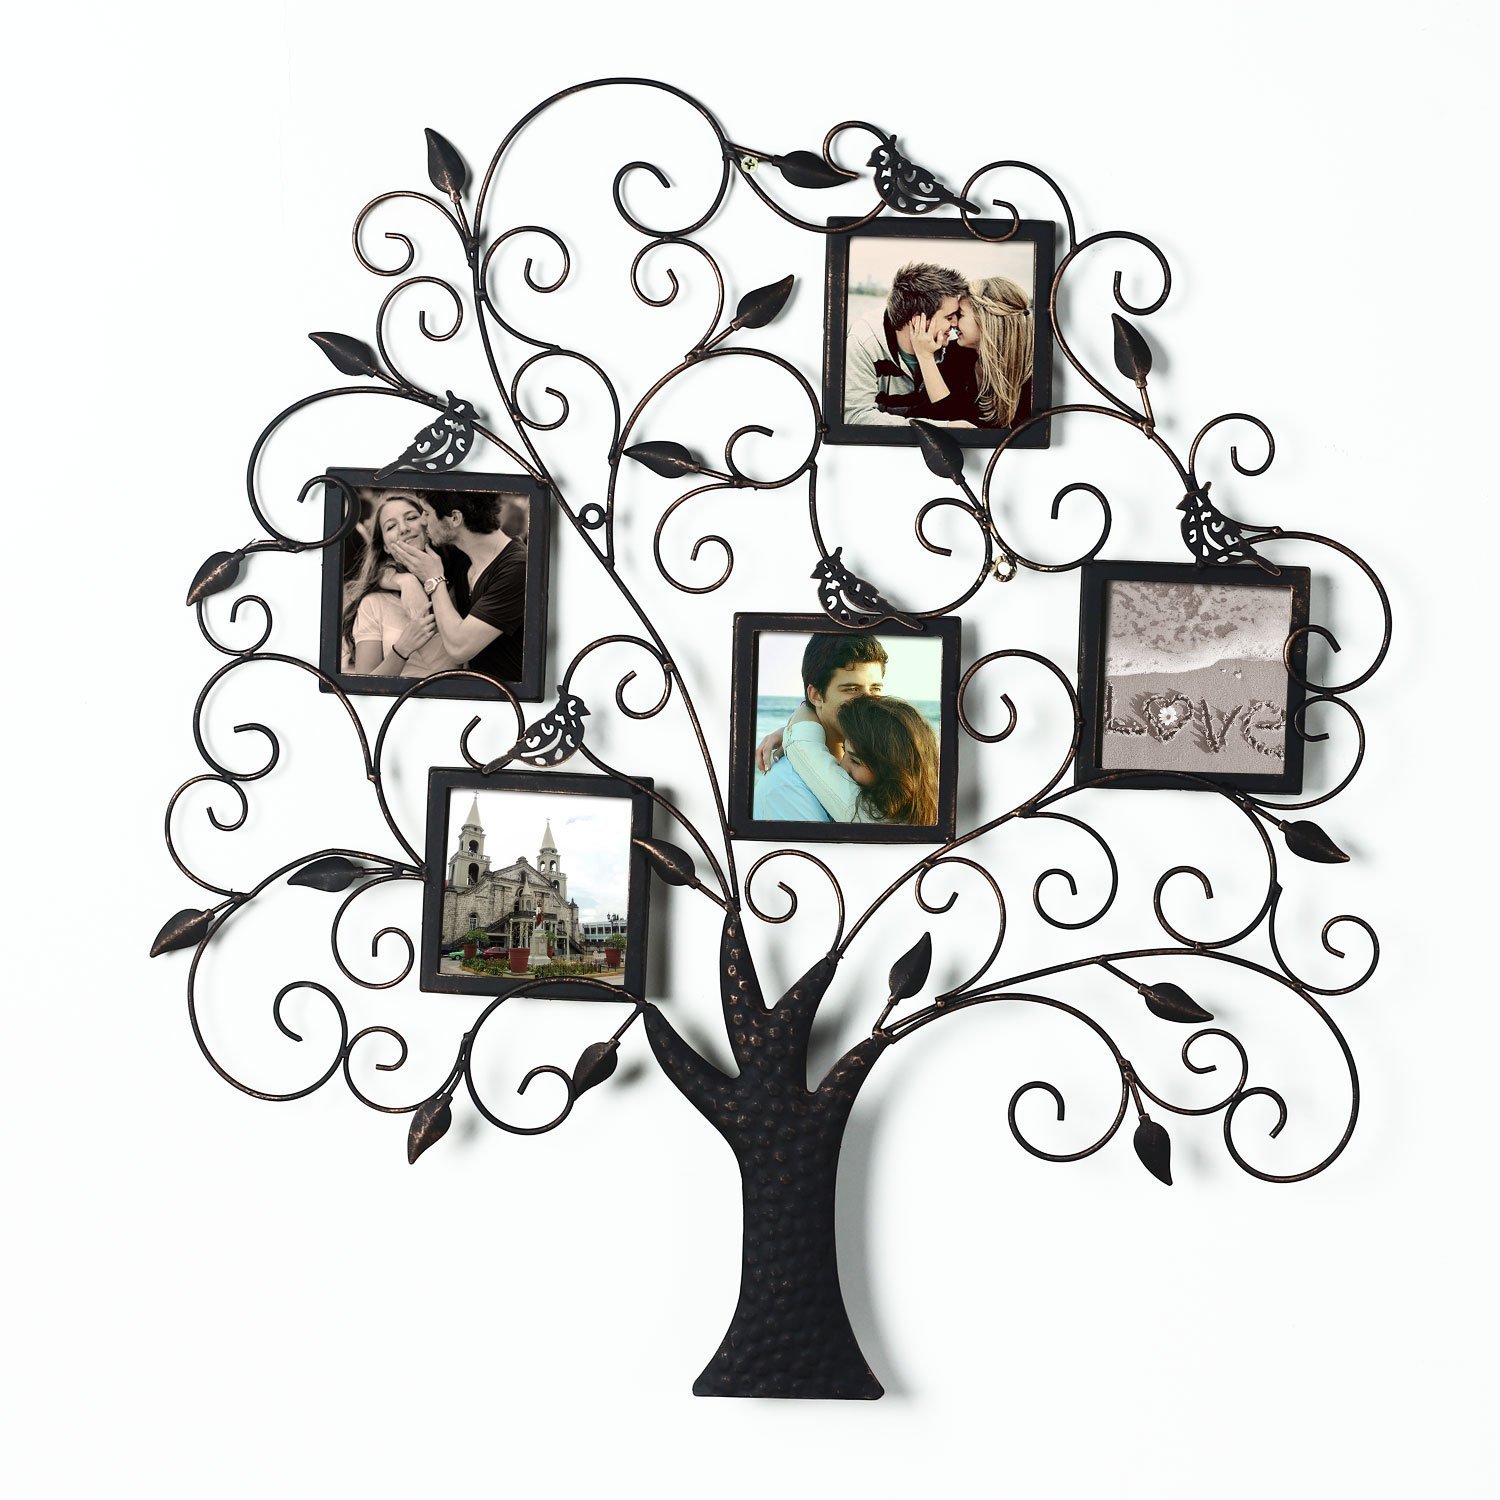 Adeco PF0588 Brown Black Decorative Tree Style Collage Iron Metal Wall Family Tree Scroll Hanging Picture Photo Frame, 5 Opening , 4x4" Each, Black with Antique Finish